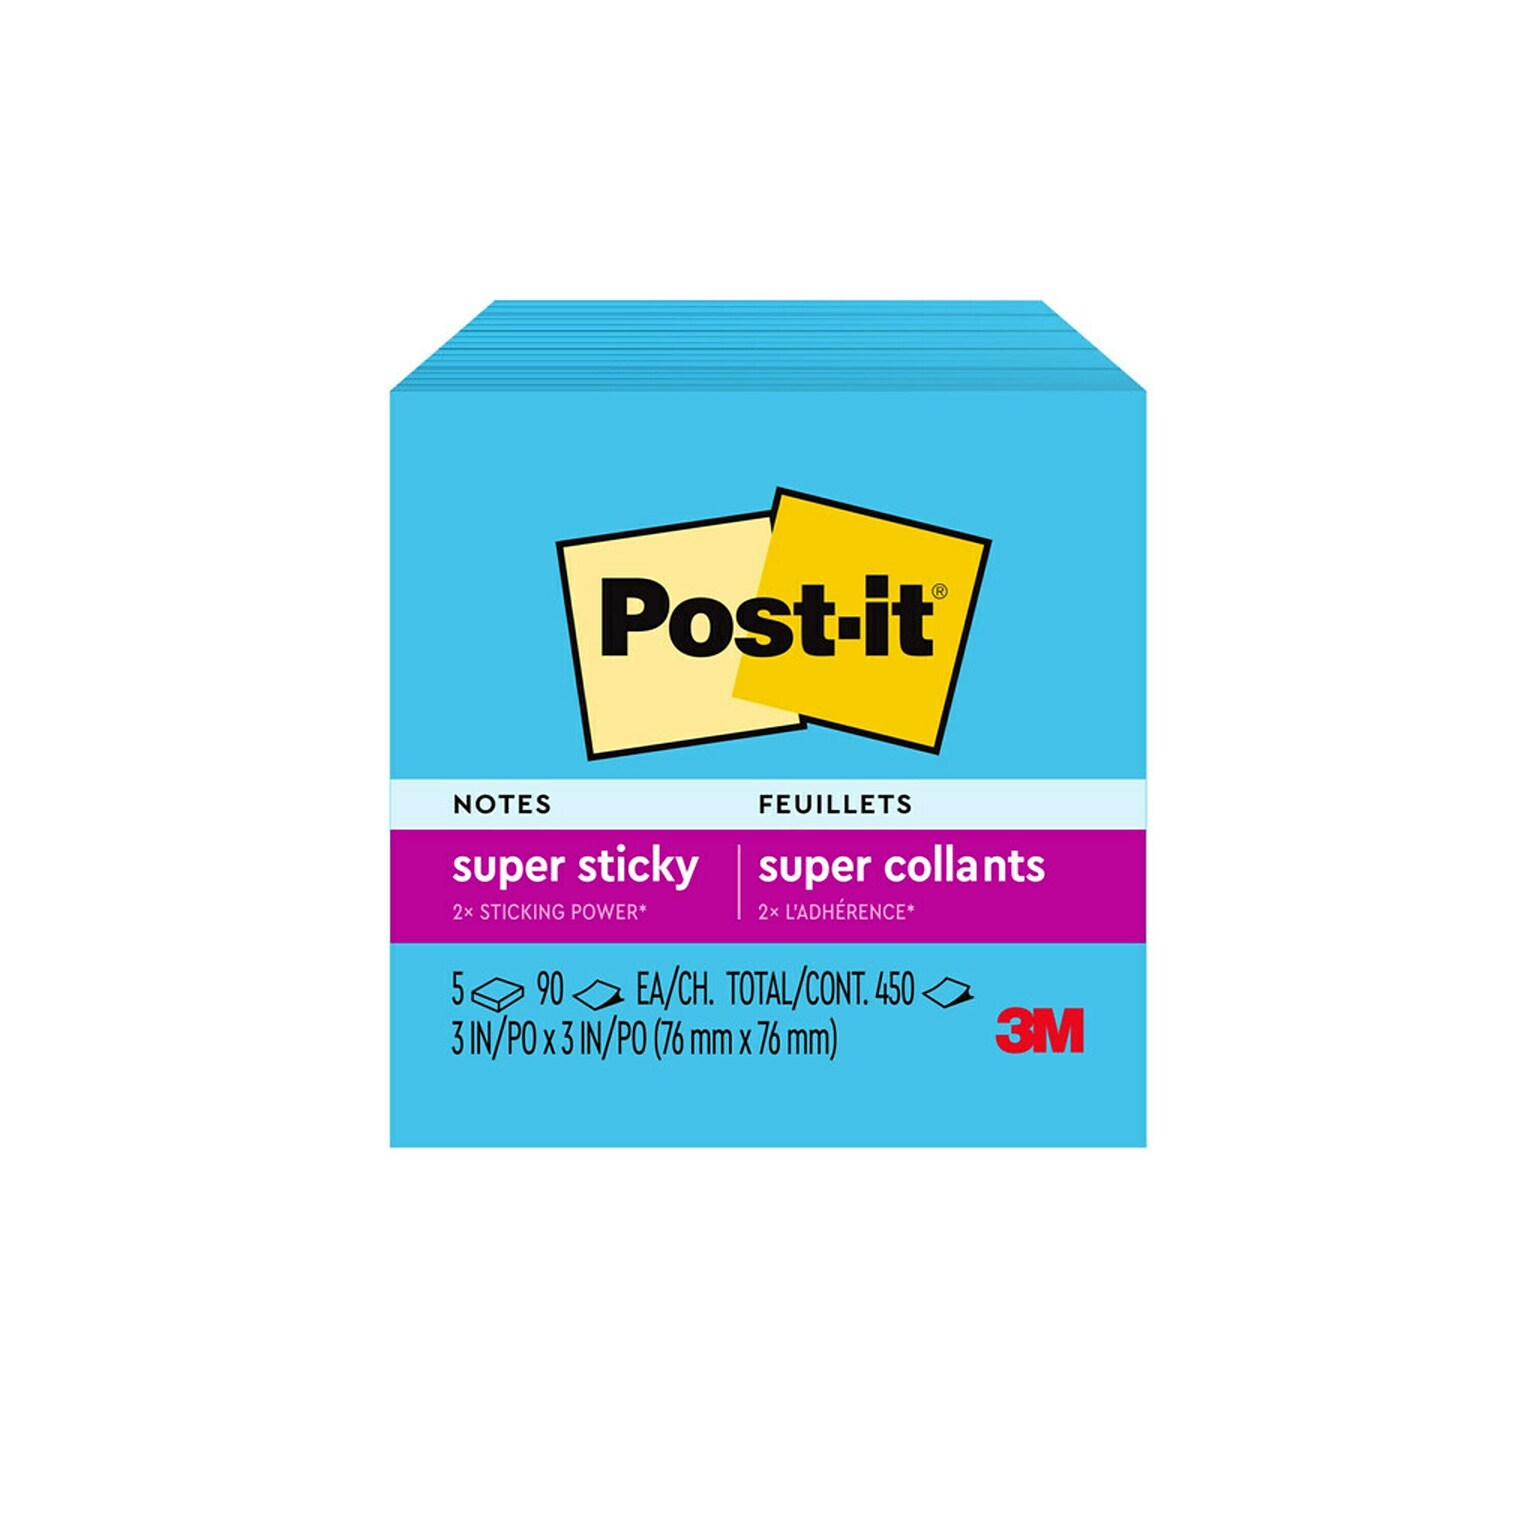 Post-it Super Sticky Notes, 3 x 3, Blue Paradise, 90 Sheet/Pad, 5 Pads/Pack (654-5SSBE)